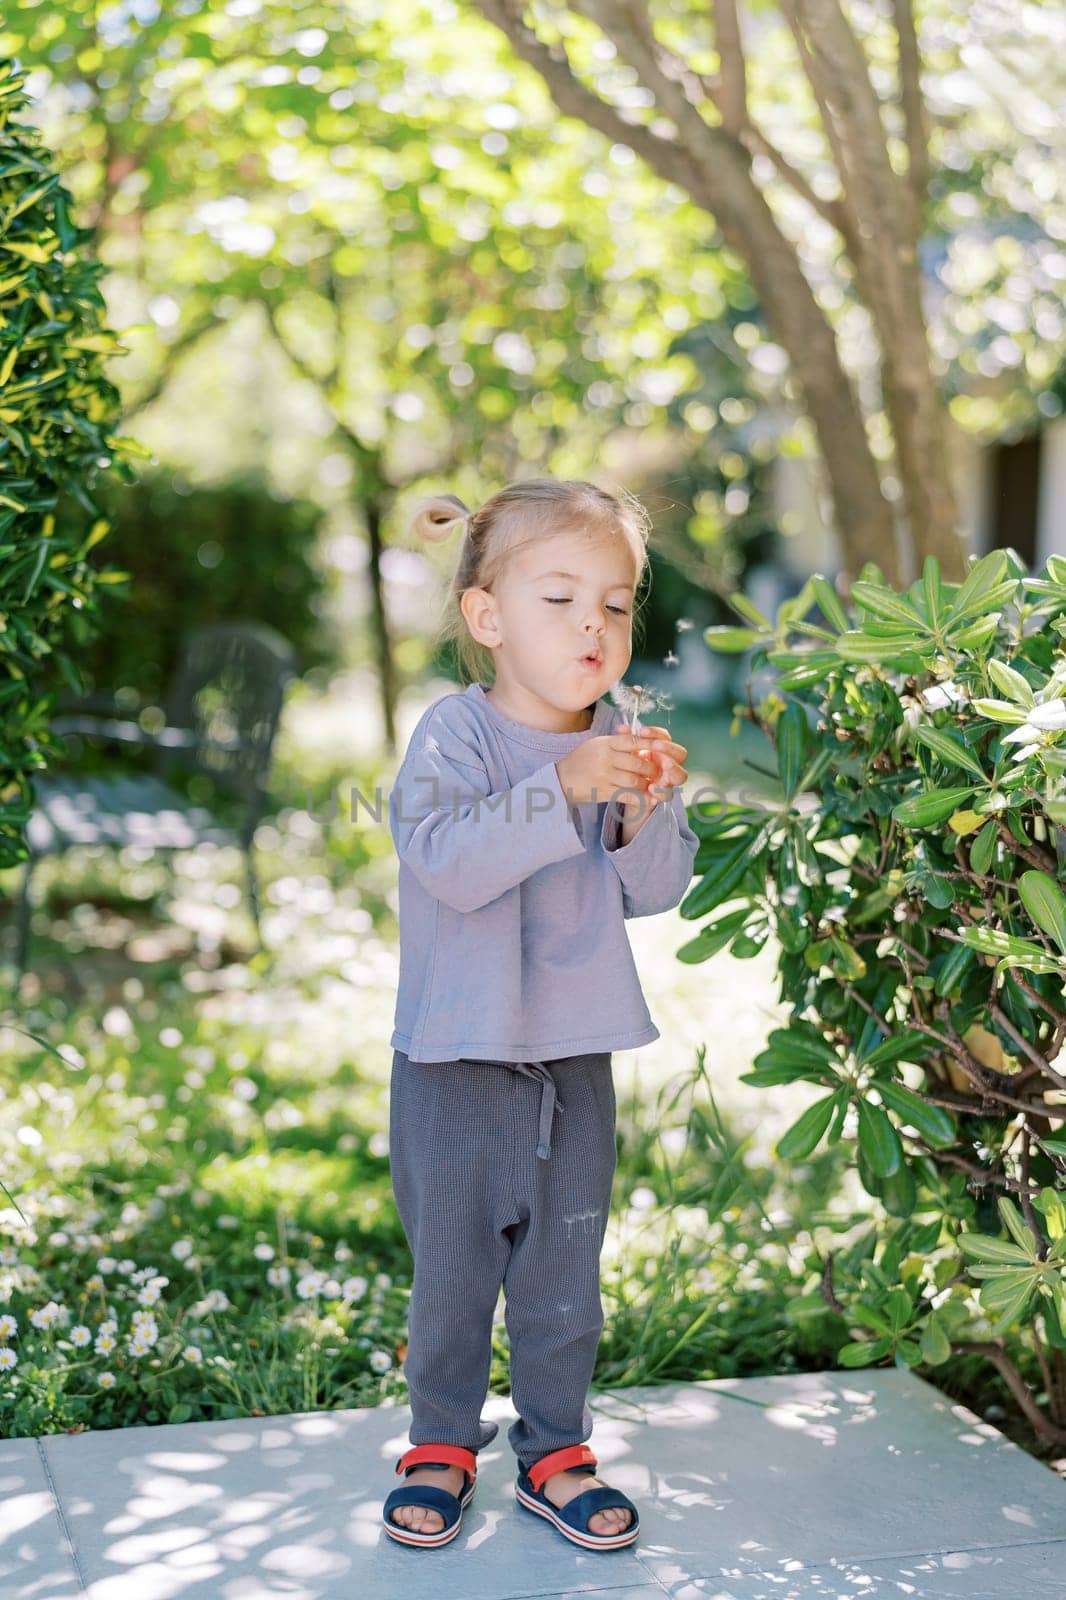 Little girl blowing on a dandelion in her hand while standing in a sunny garden by Nadtochiy